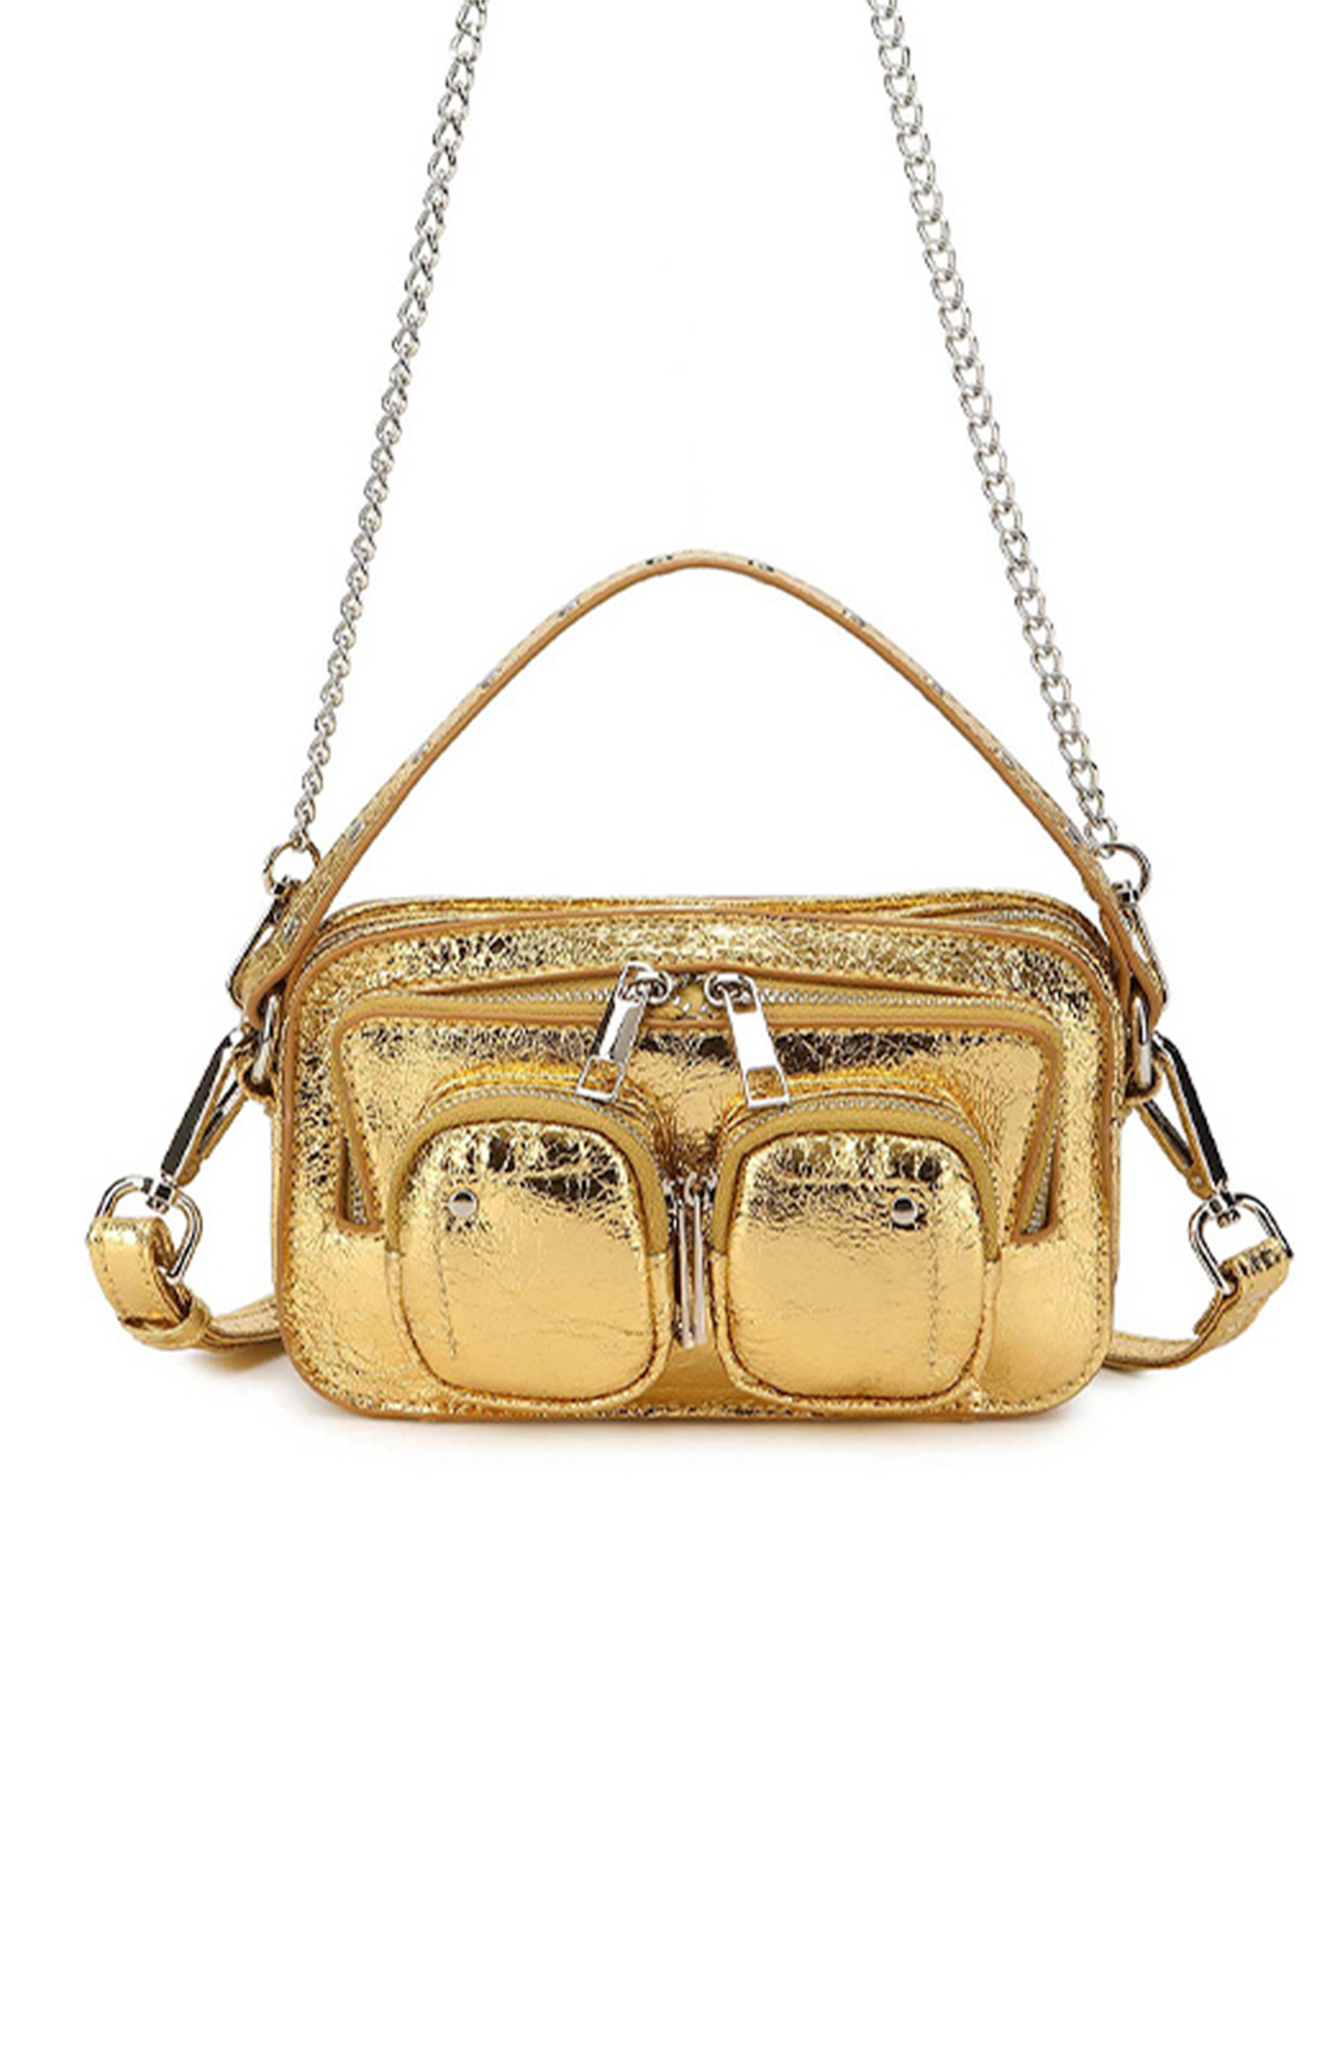 Helena has a large compartment with an inner pocket, and two small pockets located on the front. The bag has silver details. A chain and an adjustable strap for the bag are included. These are removable.